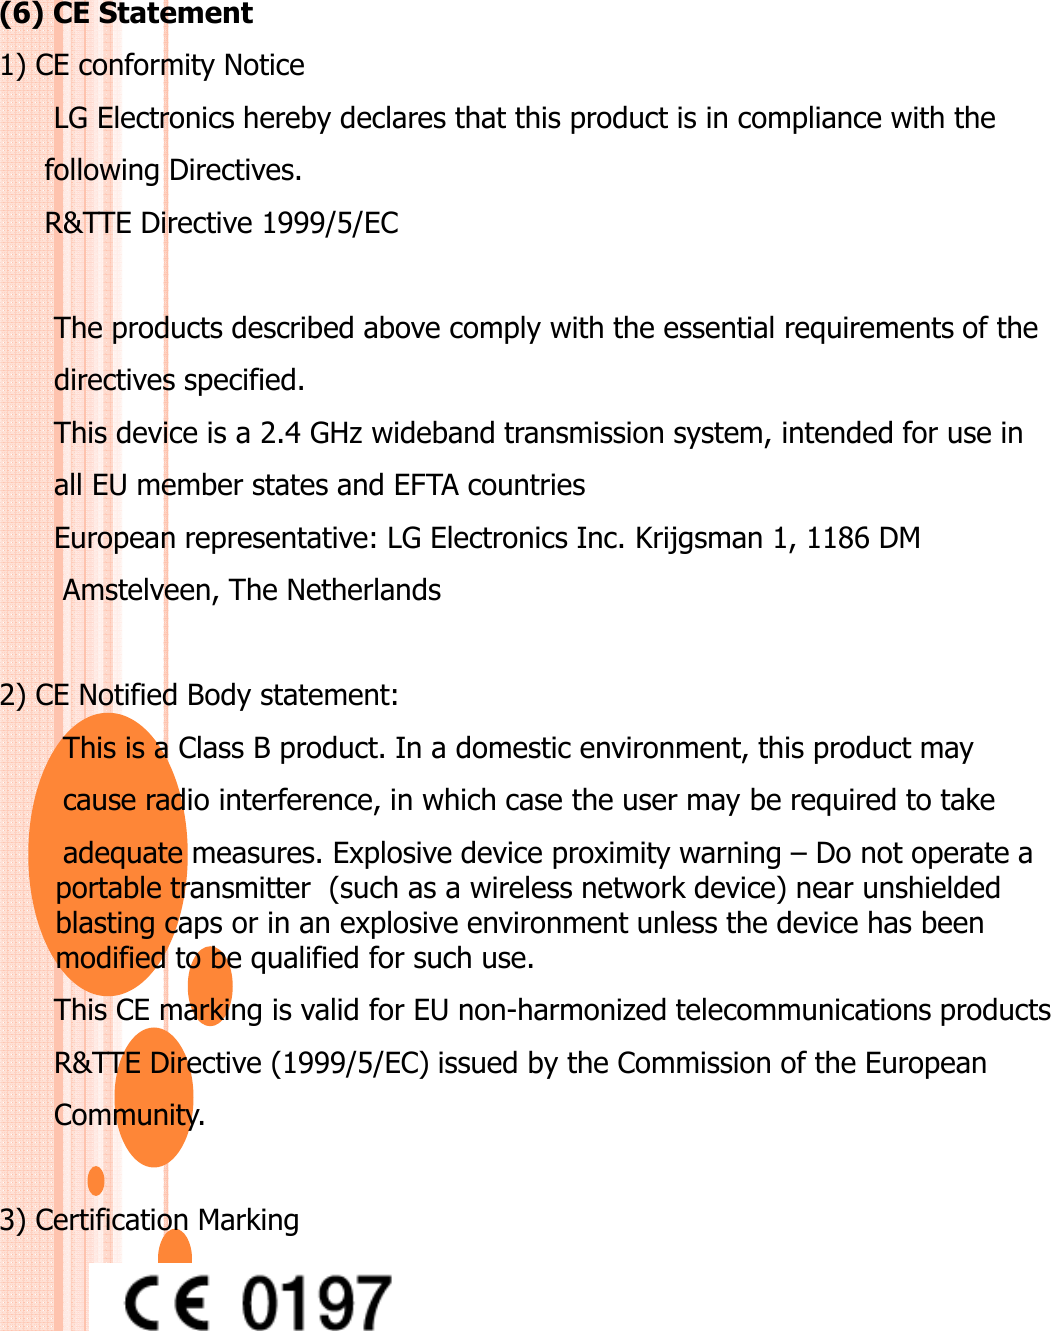 (6) CE Statement1) CE conformity NoticeLG Electronics hereby declares that this product is in compliance with thefollowing Directives.R&amp;TTE Directive 1999/5/EC The products described above comply with the essential requirements of the directives specified. This device is a 2.4 GHz wideband transmission system, intended for use in all EU member states and EFTA countriesEuropean representative: LG Electronics Inc. Krijgsman 1, 1186 DM Amstelveen, The Netherlands 2) CE Notified Body statement:This is a Class B product. In a domestic environment, this product may cause radio interference, in which case the user may be required to take adequate measures. Explosive device proximity warning – Do not operate a portable transmitter  (such as a wireless network device) near unshielded blasting caps or in an explosive environment unless the device has been modified to be qualified for such use.This CE marking is valid for EU non-harmonized telecommunications products R&amp;TTE Directive (1999/5/EC) issued by the Commission of the European Community.3) Certification Marking